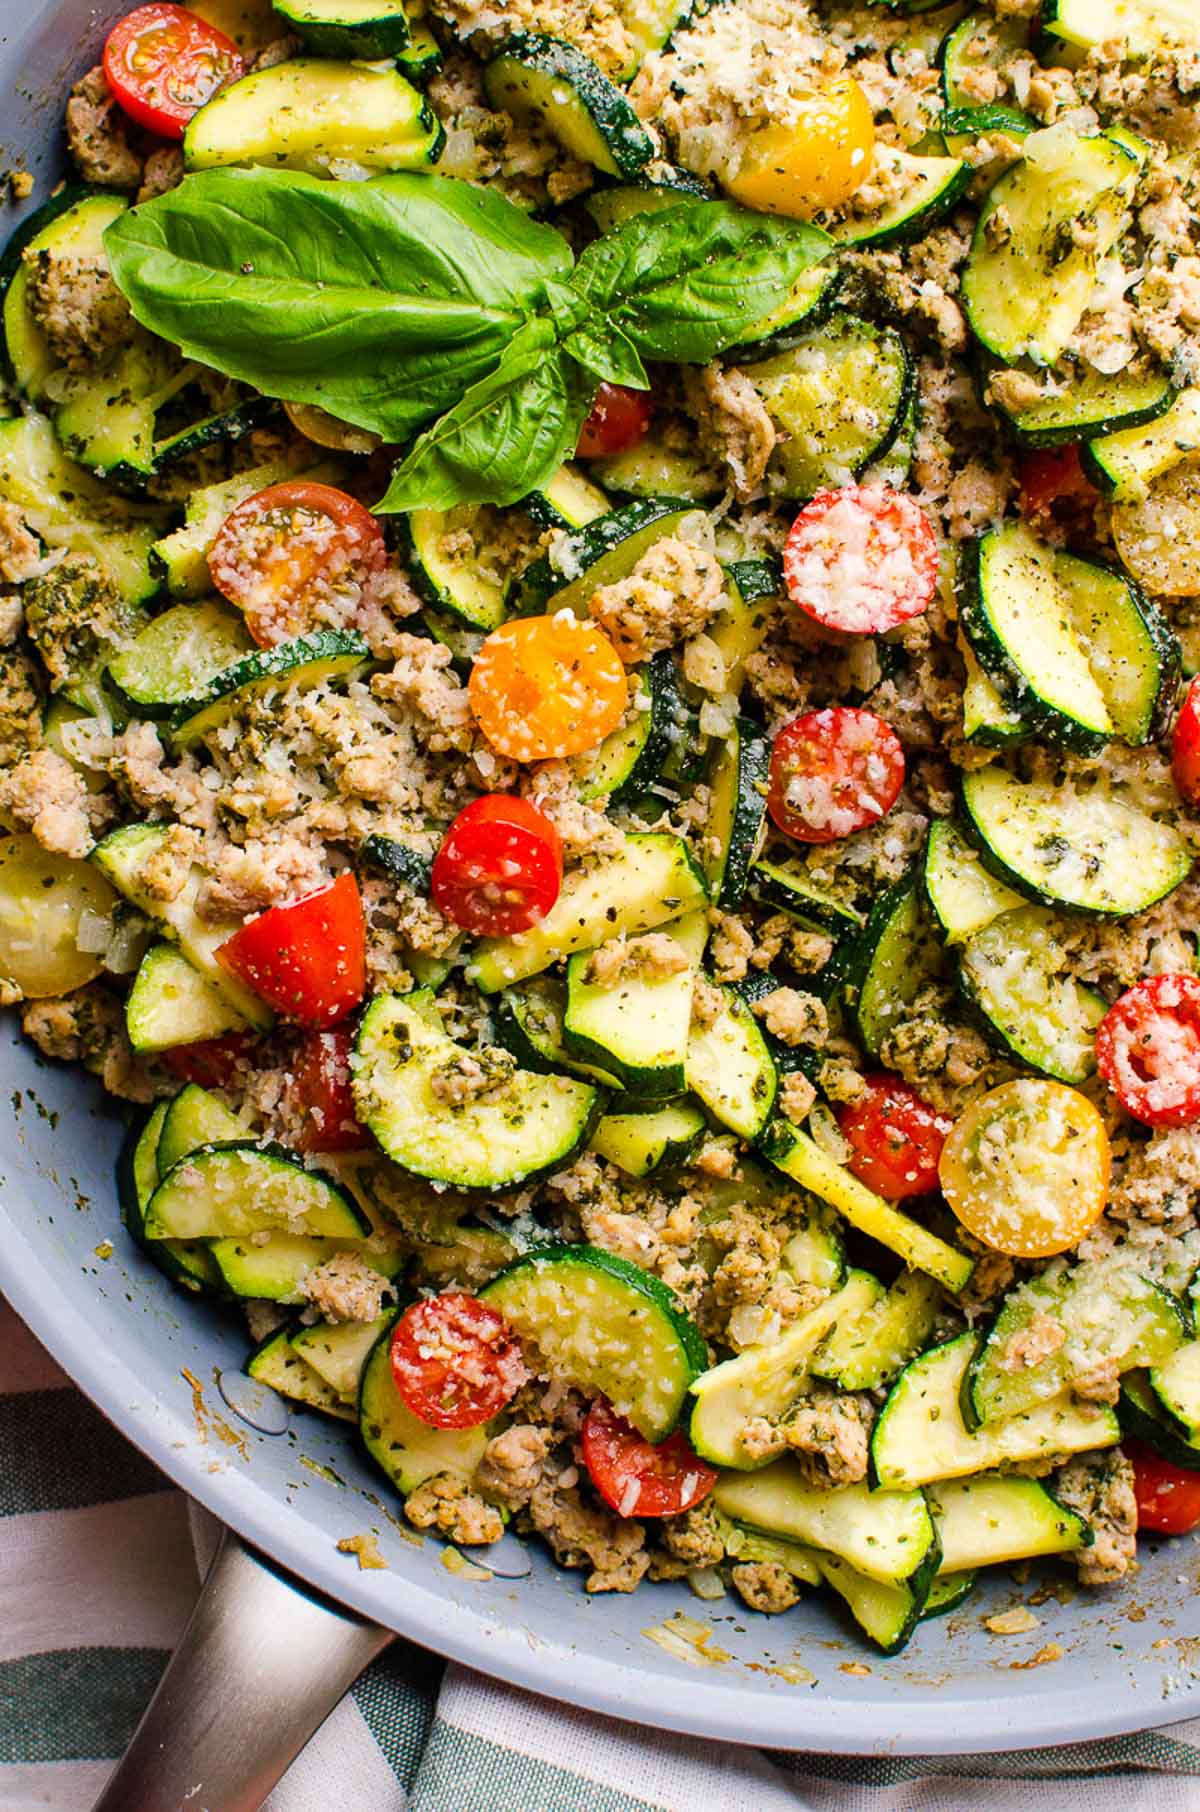 Low carb ground turkey and zucchini skillet with pesto and tomatoes in skillet.